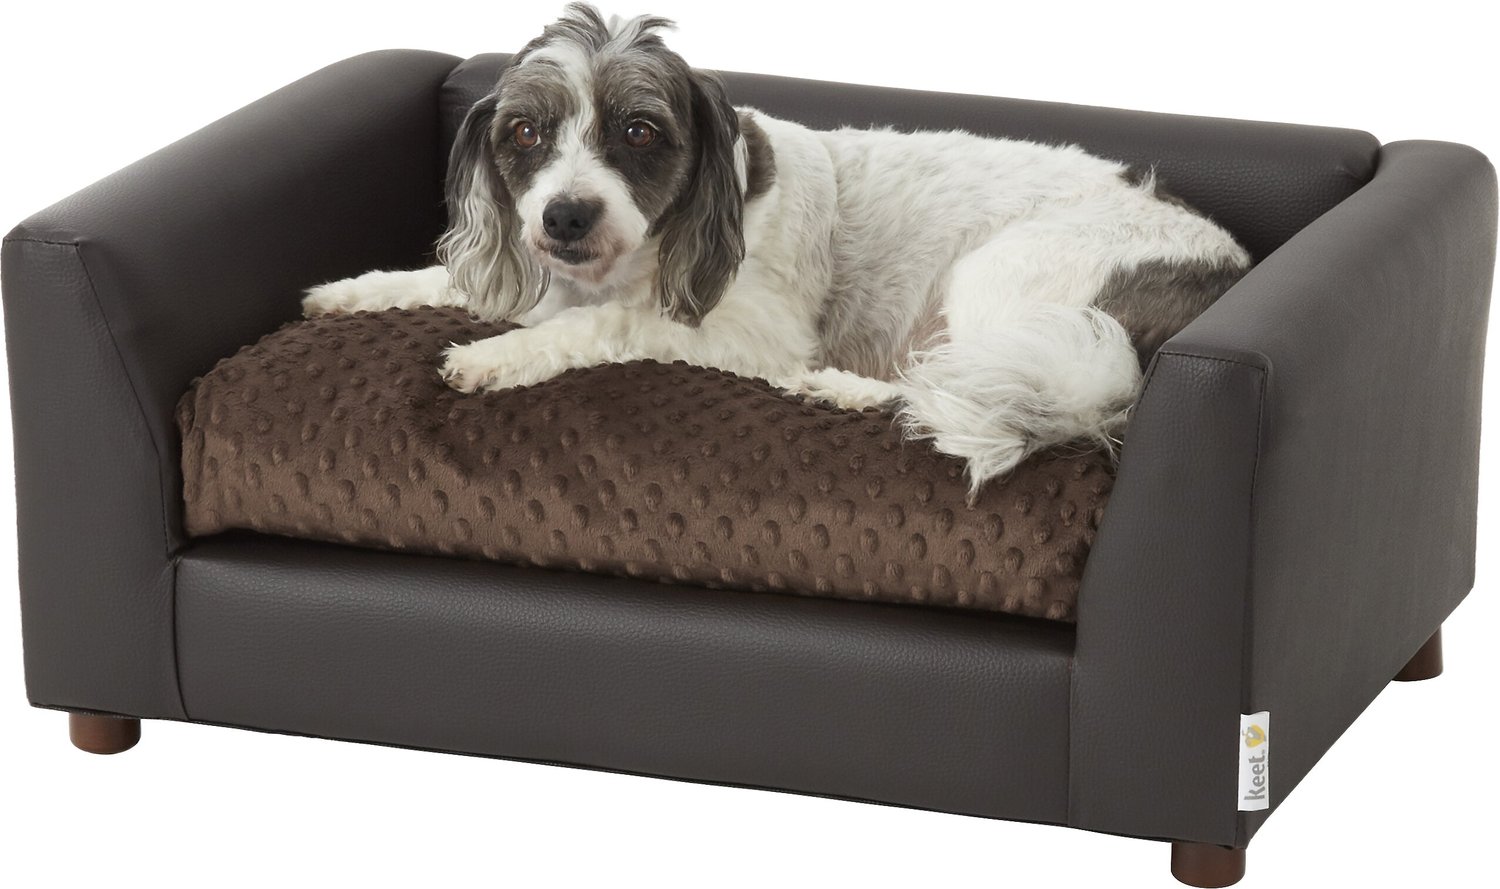 KEET Fluffly Deluxe Sofa Dog Bed w/Removable Cover